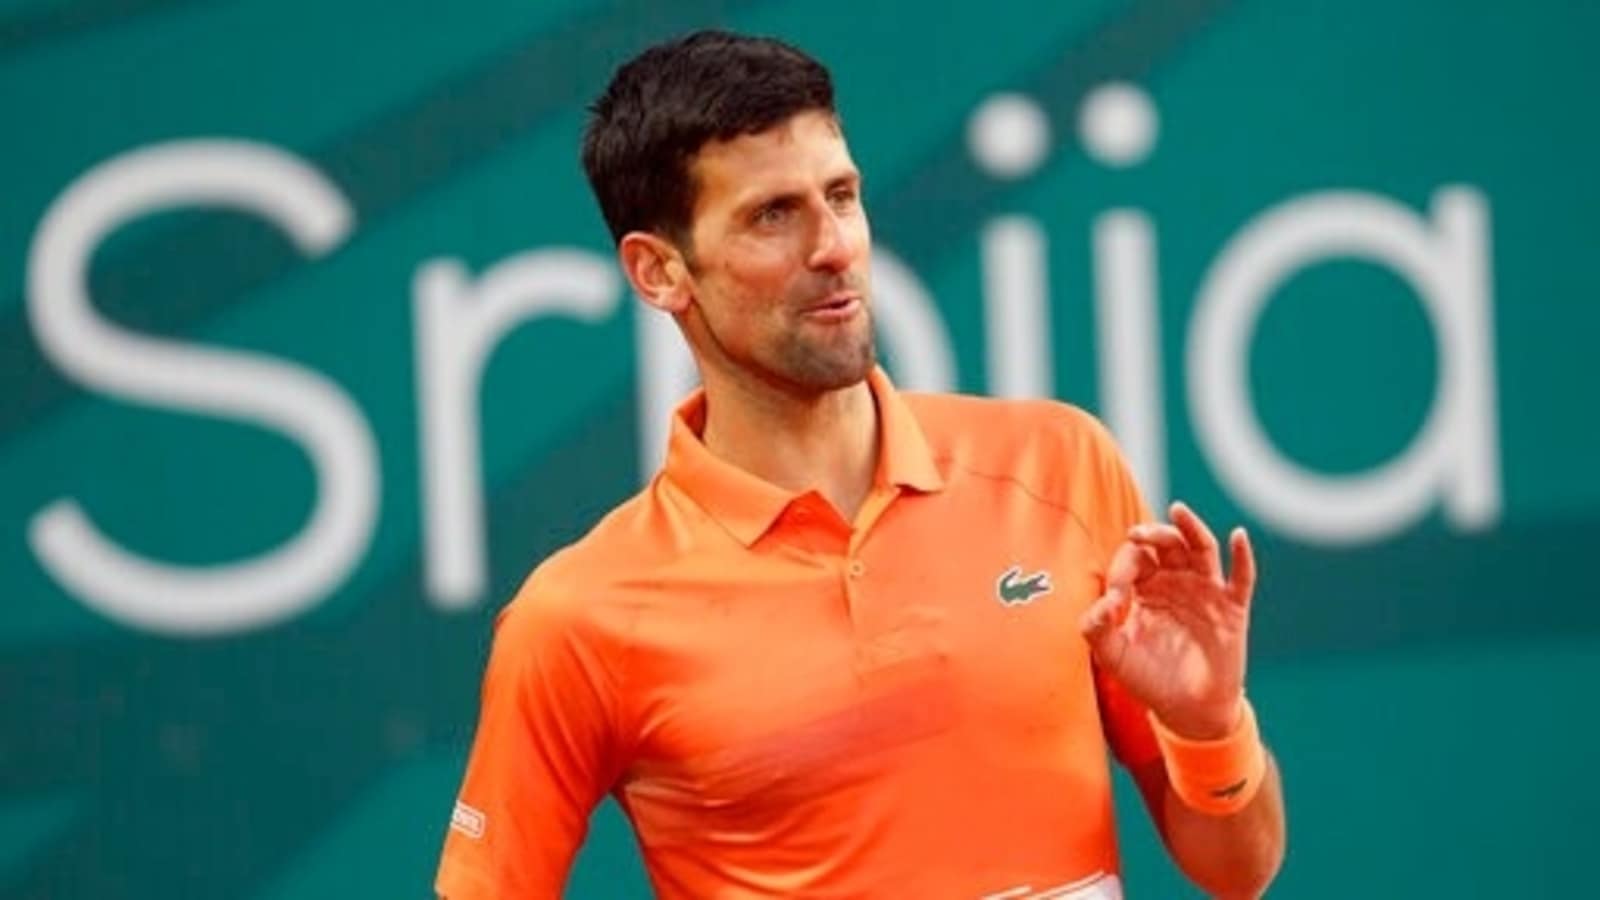 Djokovic rallies to beat Djere in 3 sets at Serbia Open